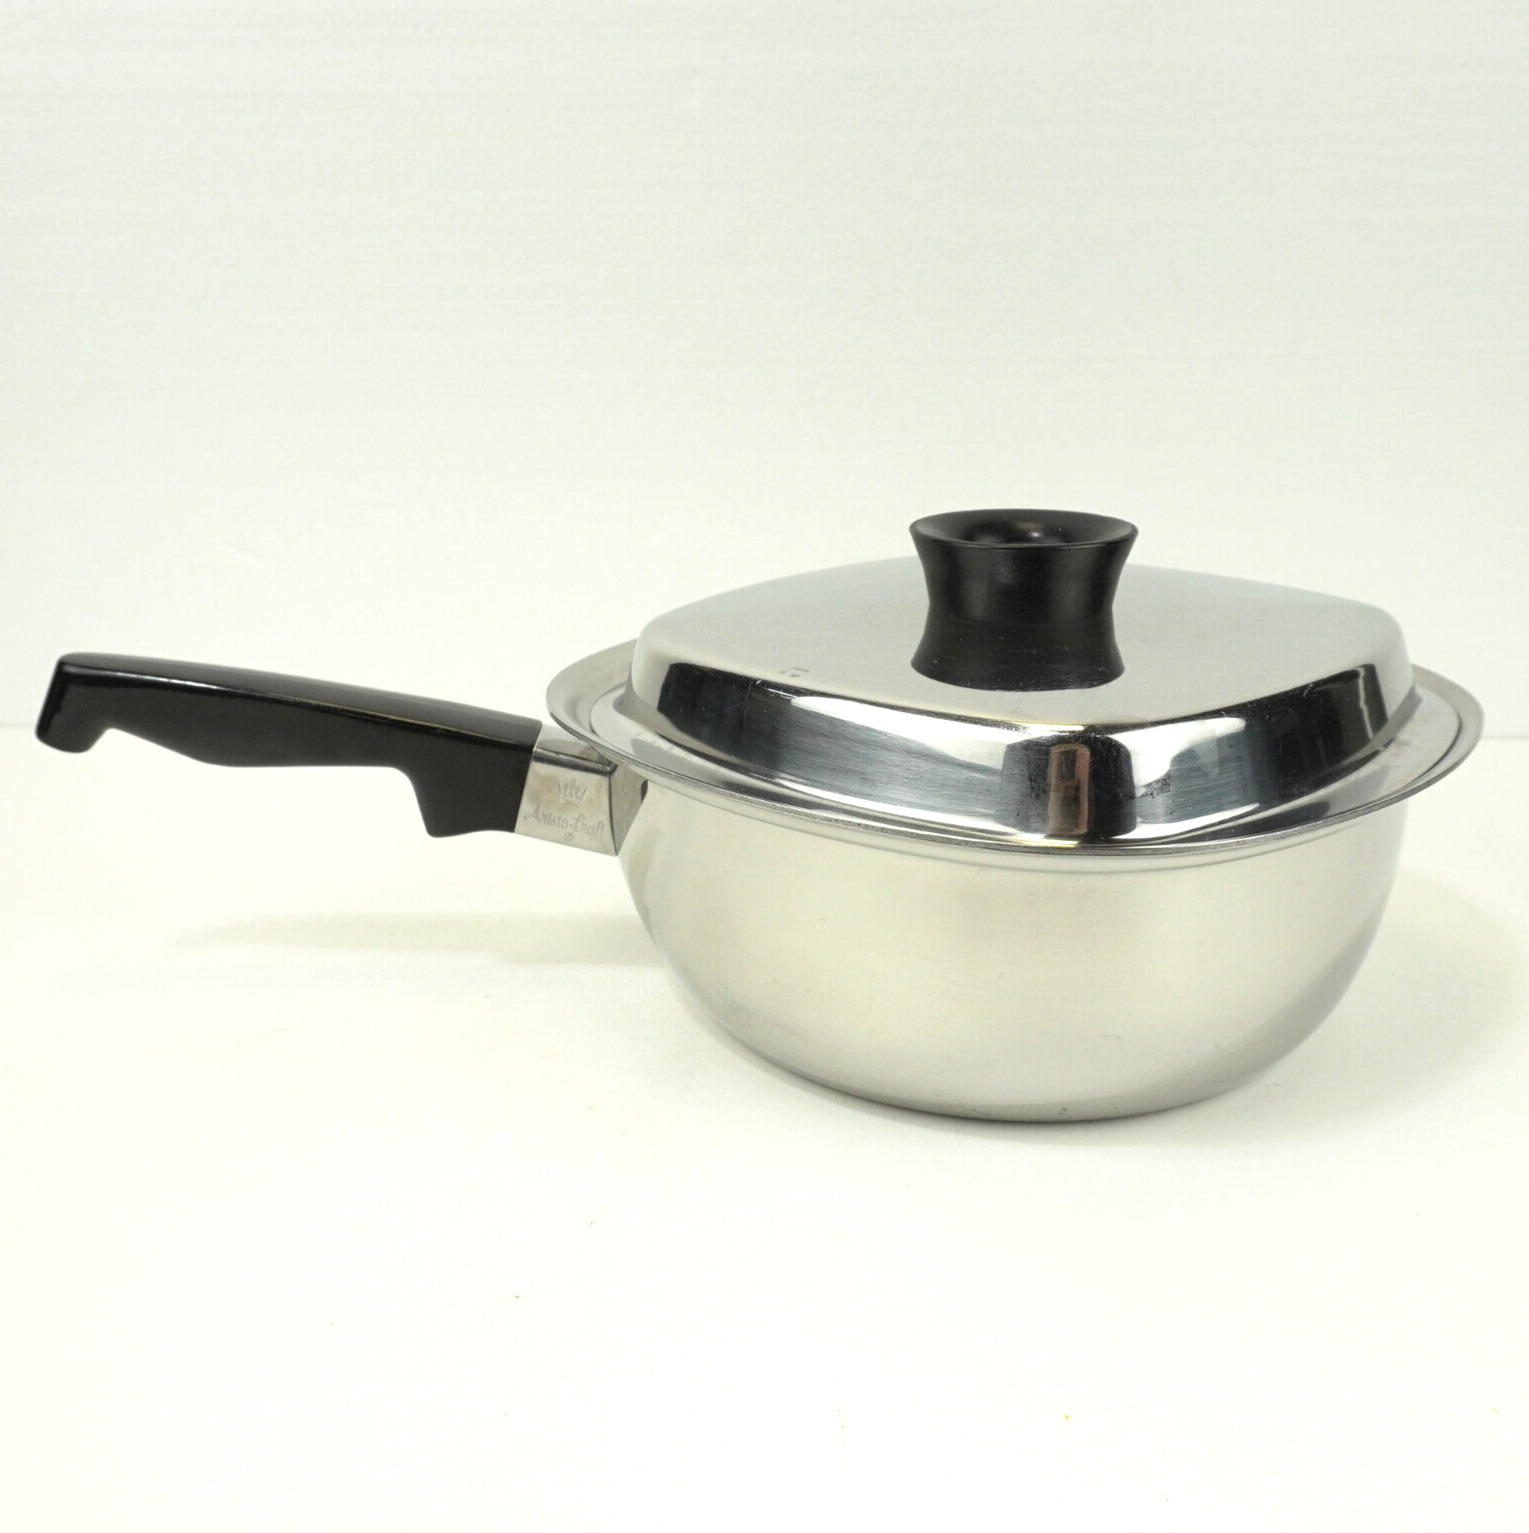 Aristo Craft By West Bend Cookware 1.5 & 3 Qt Square Sauce Pan Stainless Steel